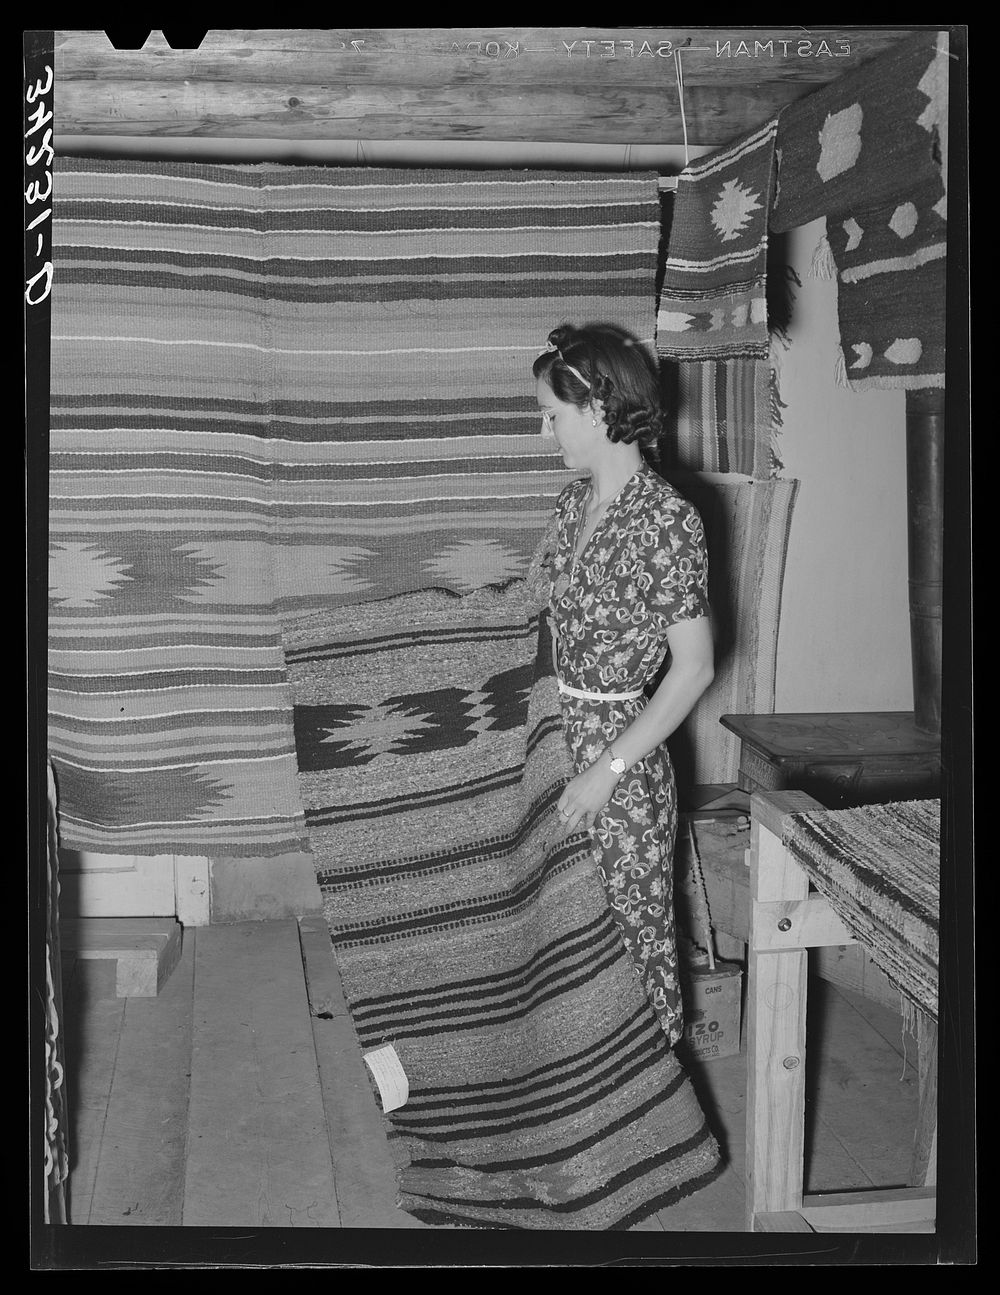 WPA (Works Progress Administration/Work Projects Administration) project supervisor displaying some of the articles made at…